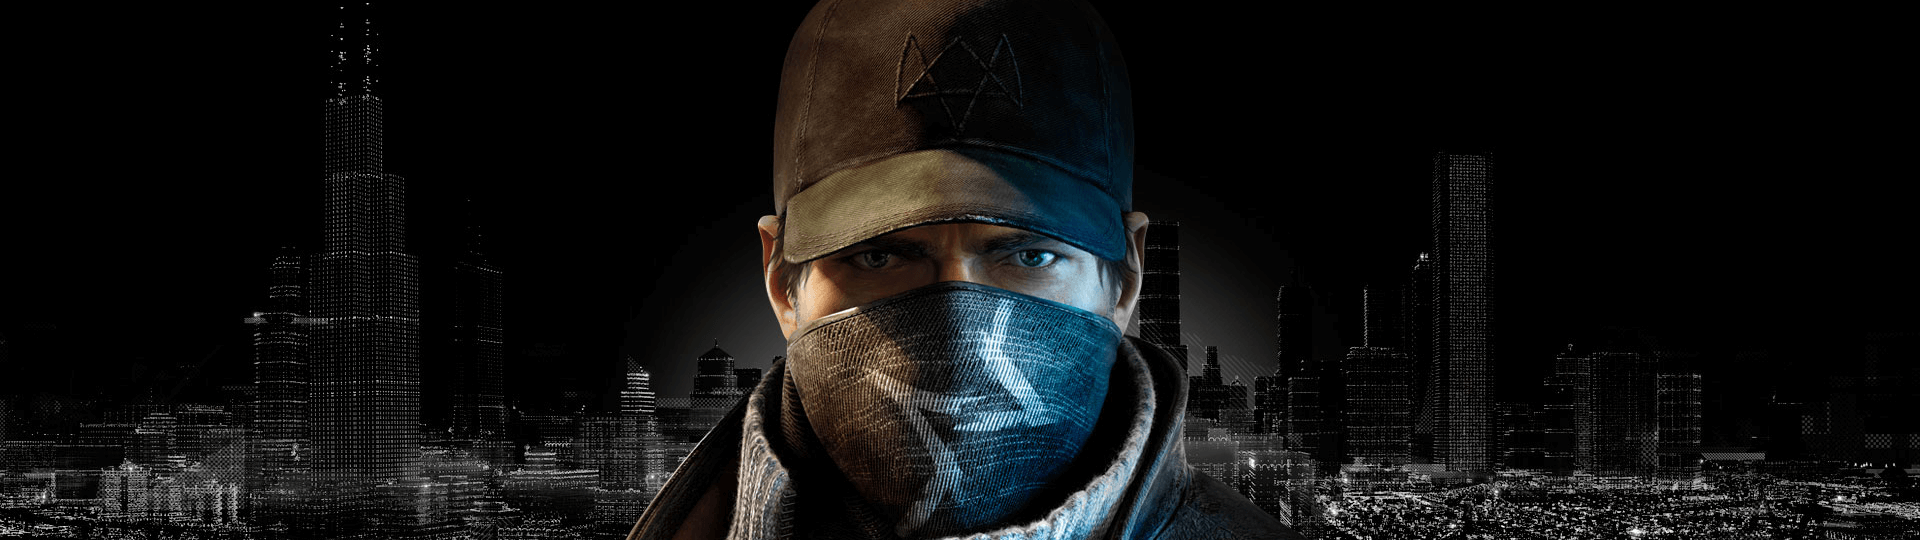 Watch dogs on steam фото 3